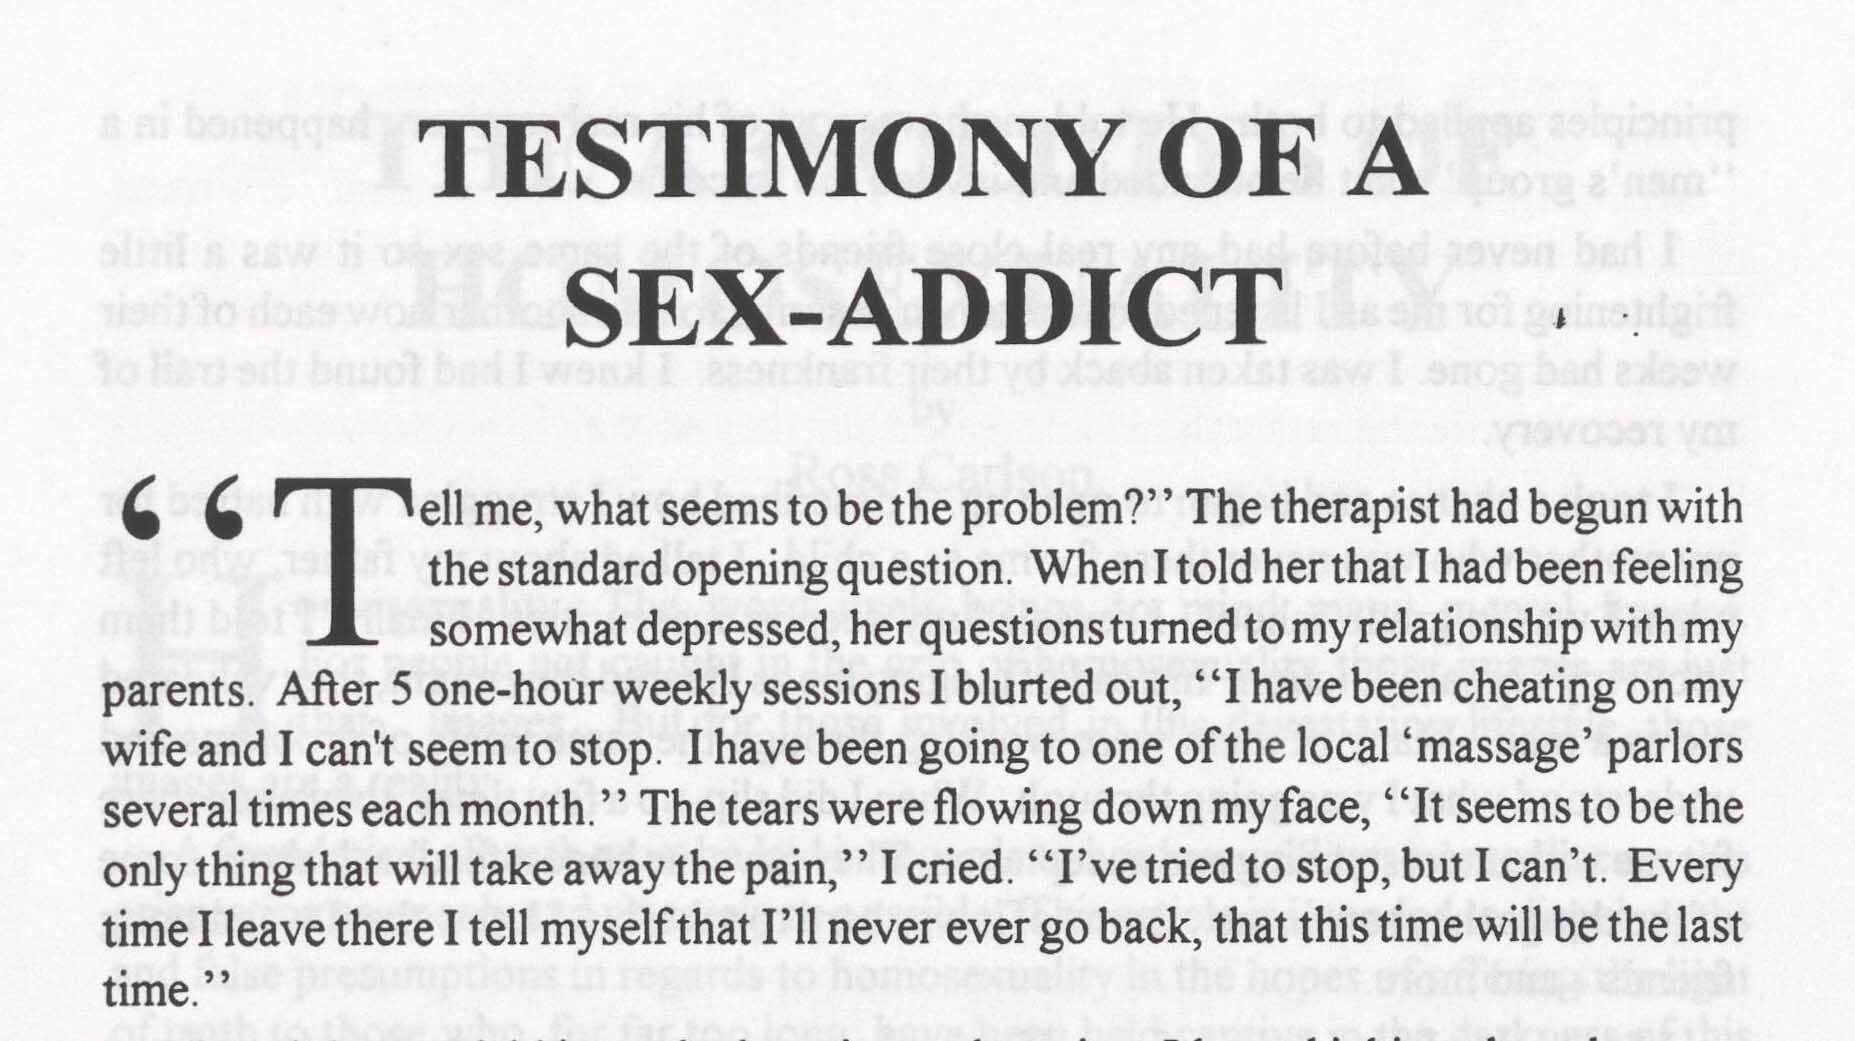 Testimony of a Sex-Addict, Tracks in the sand : Uncovering Christian men's is..., Nov 1991 - Sep 1993, © Michigan State University Libraries